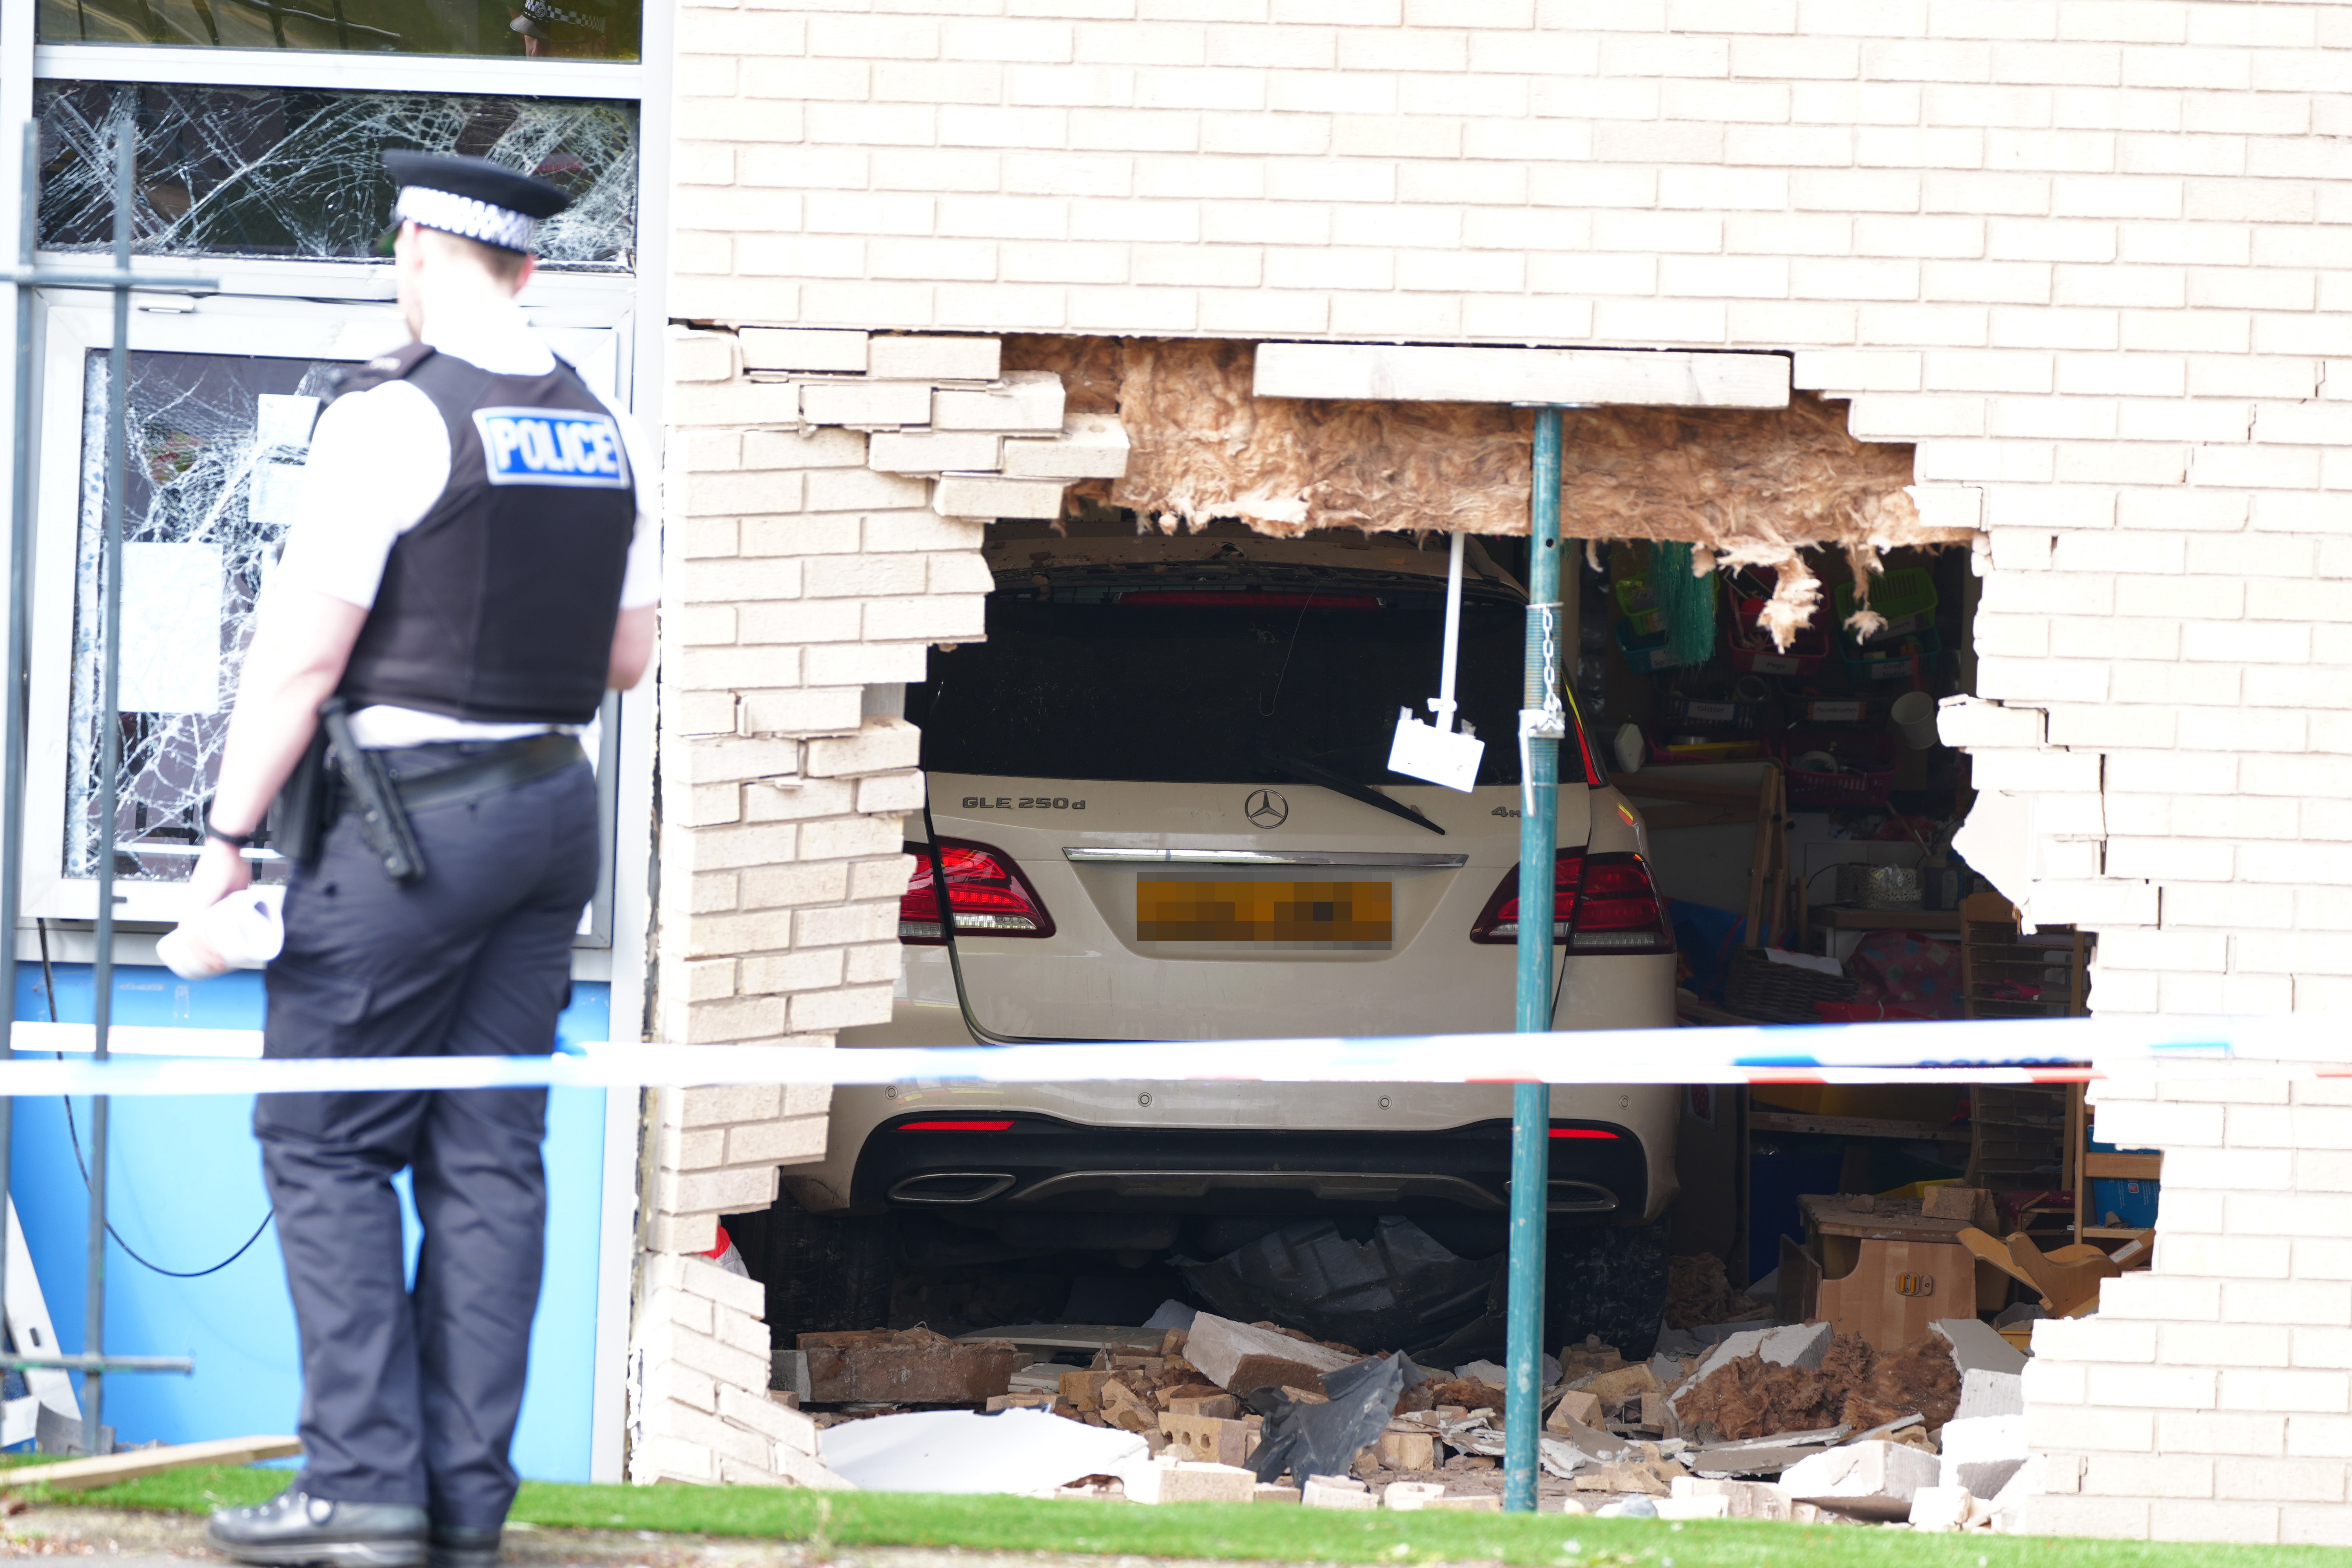 Police officers stand next to the damage after the Mercedes appeared to have crashed through the wall into a classroom